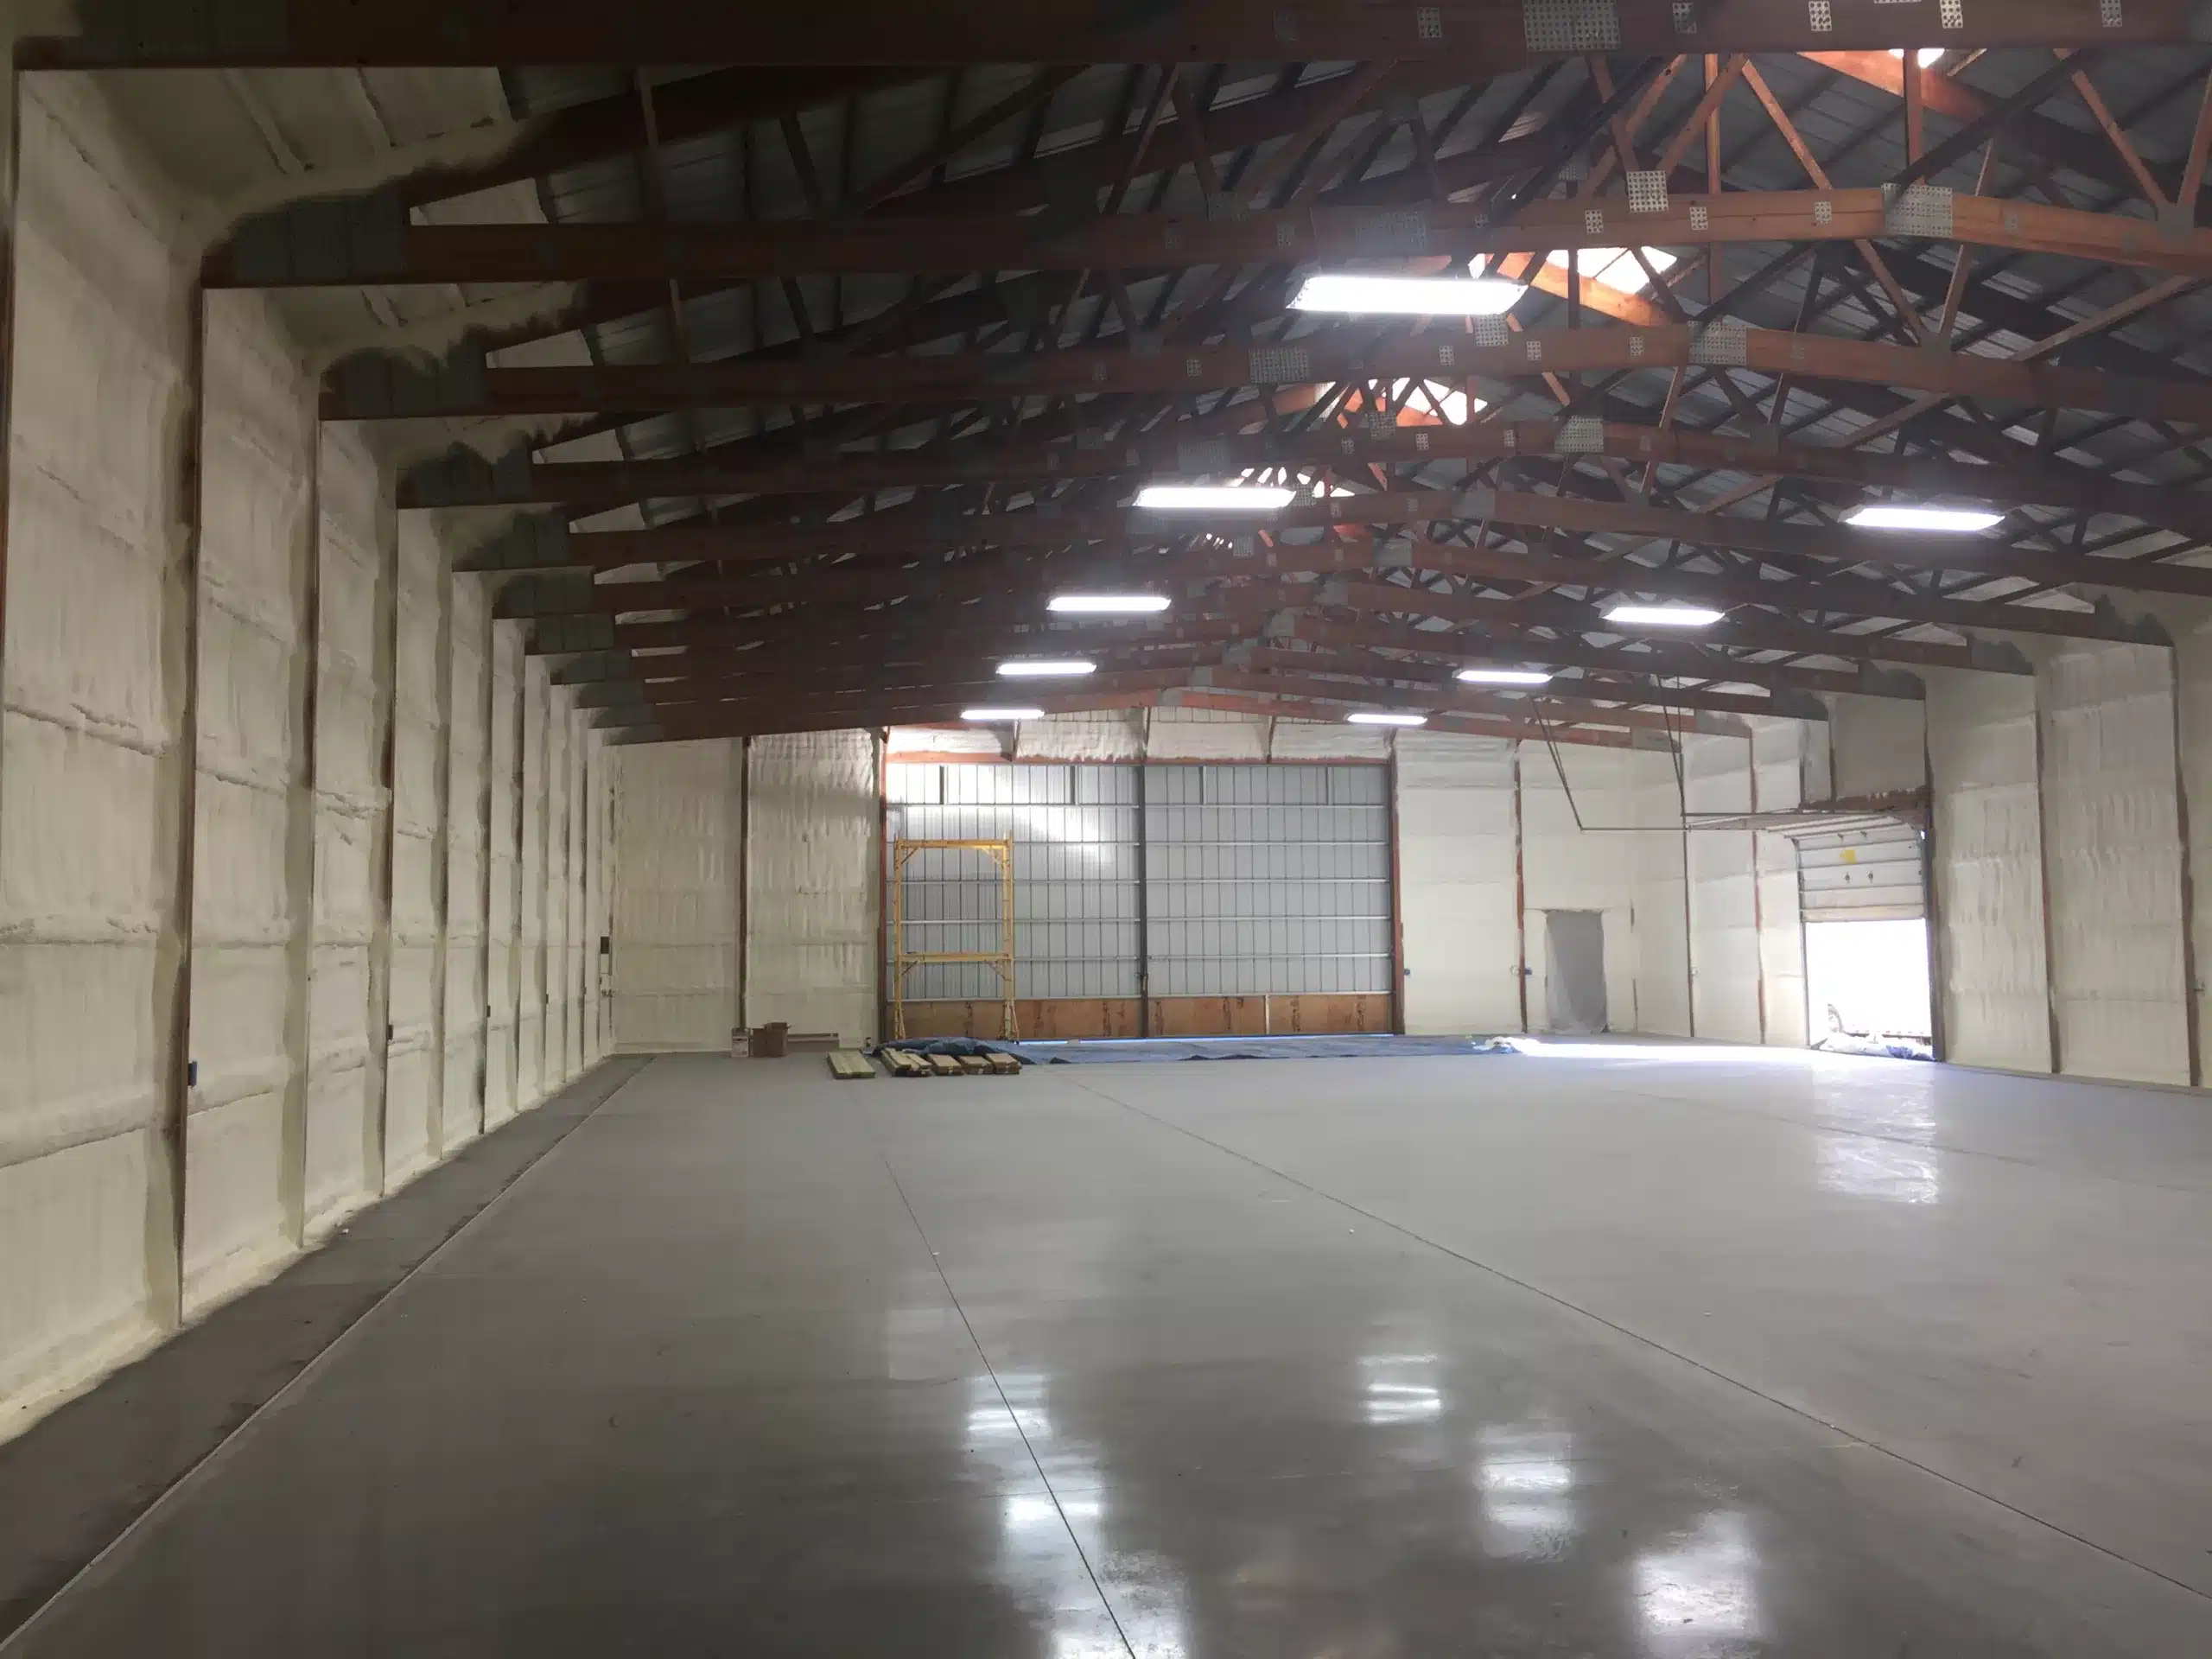 Commercial Fireproofing using Spray Foam